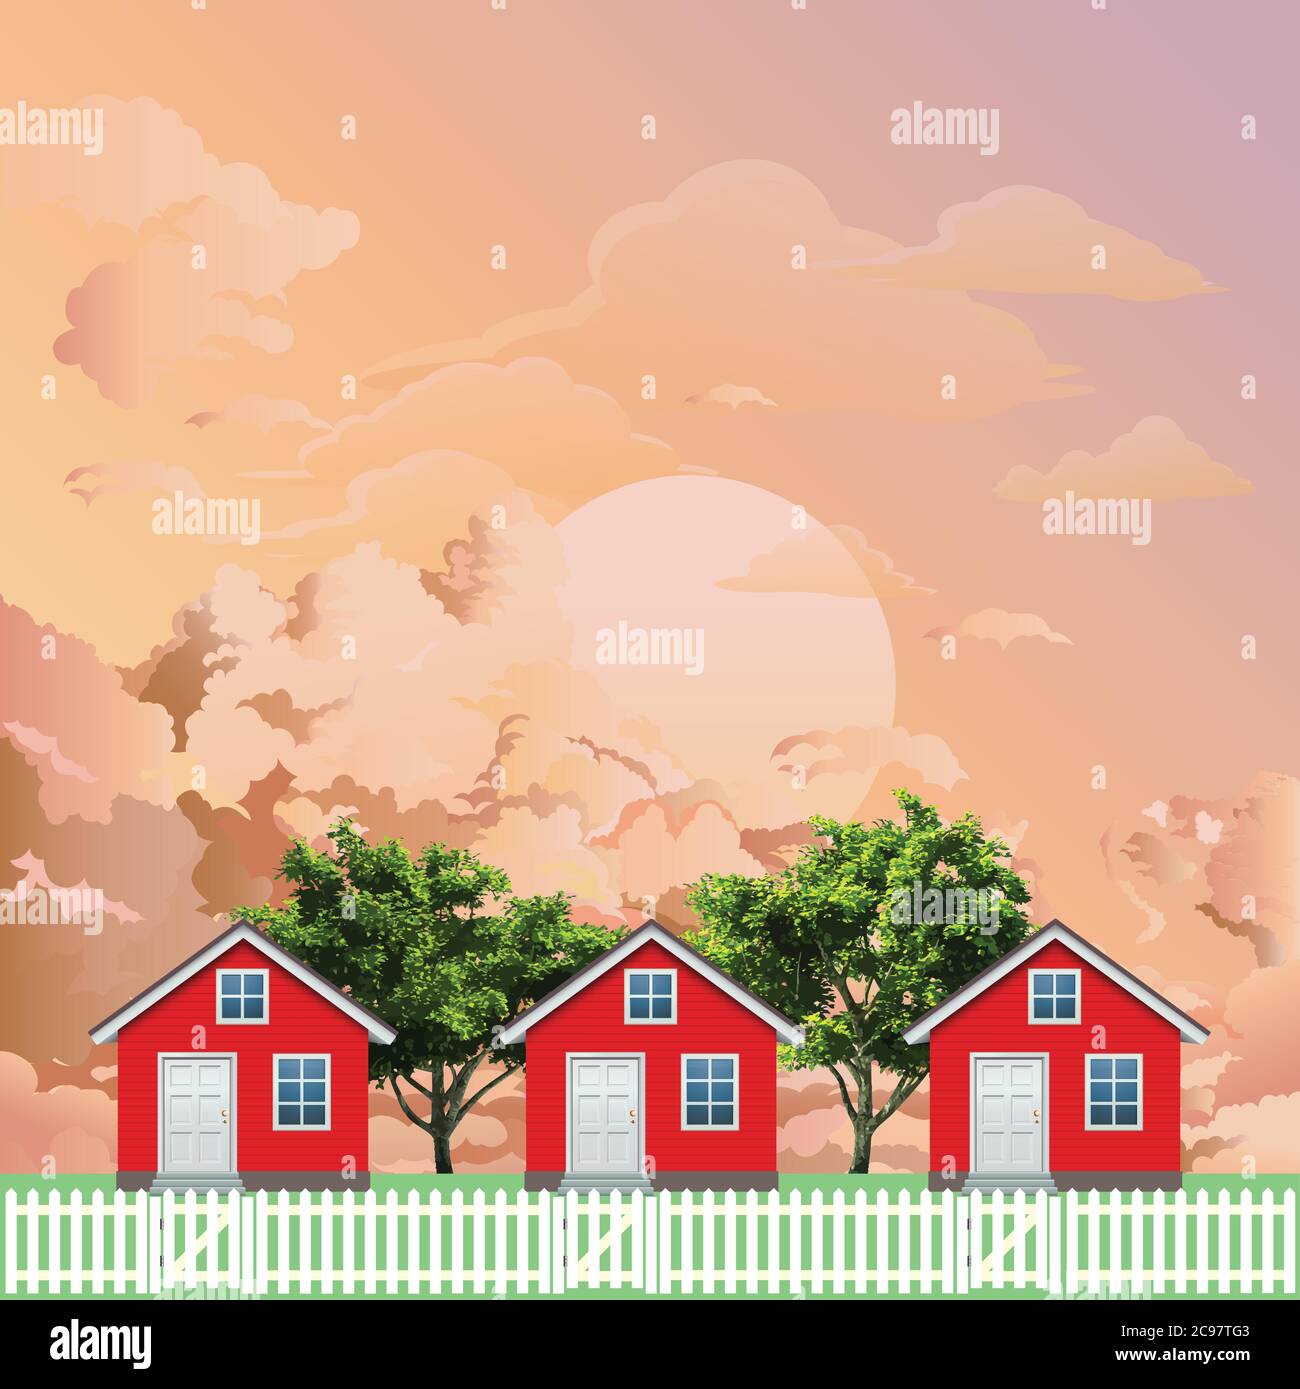 Row of detached residential houses on a suburb street with white picket fence and gate set against a stunning dawn or dusk sky Stock Vector